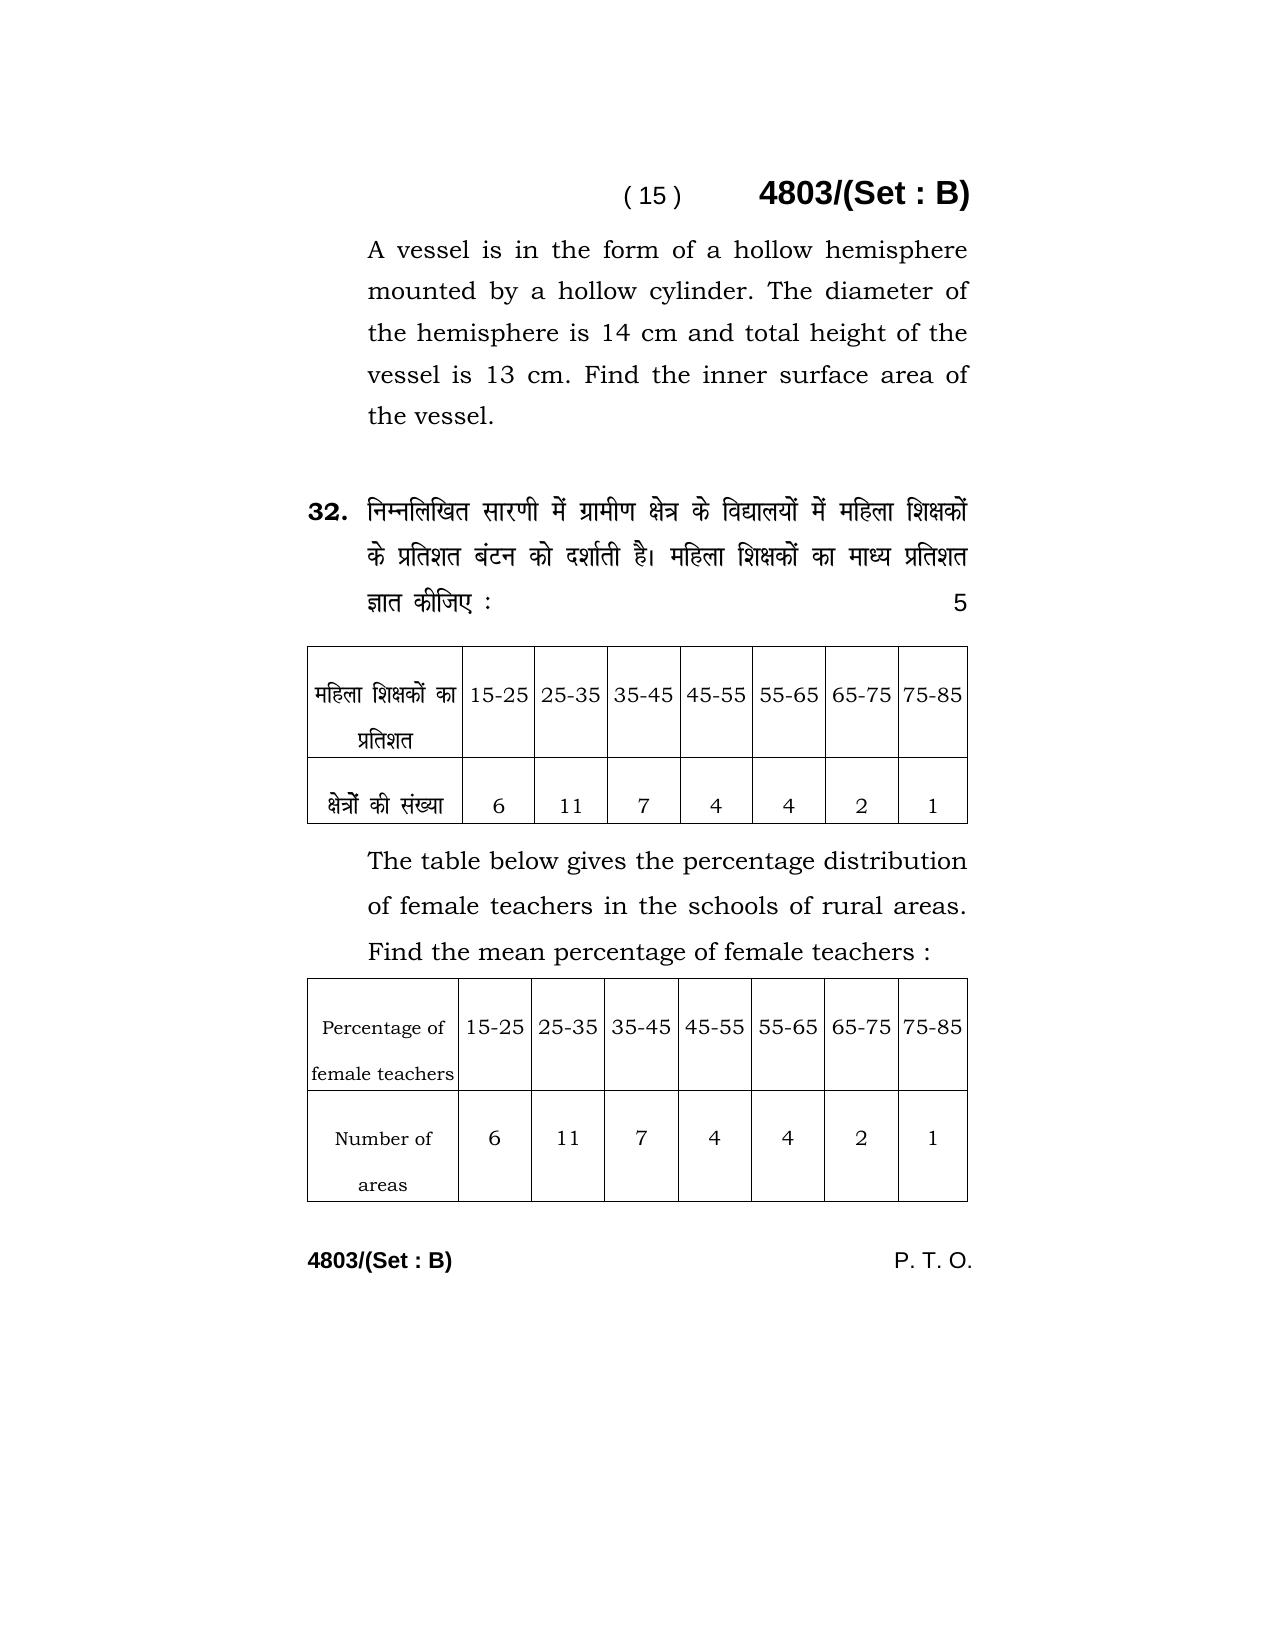 Haryana Board HBSE Class 10 Mathematics 2020 Question Paper - Page 31